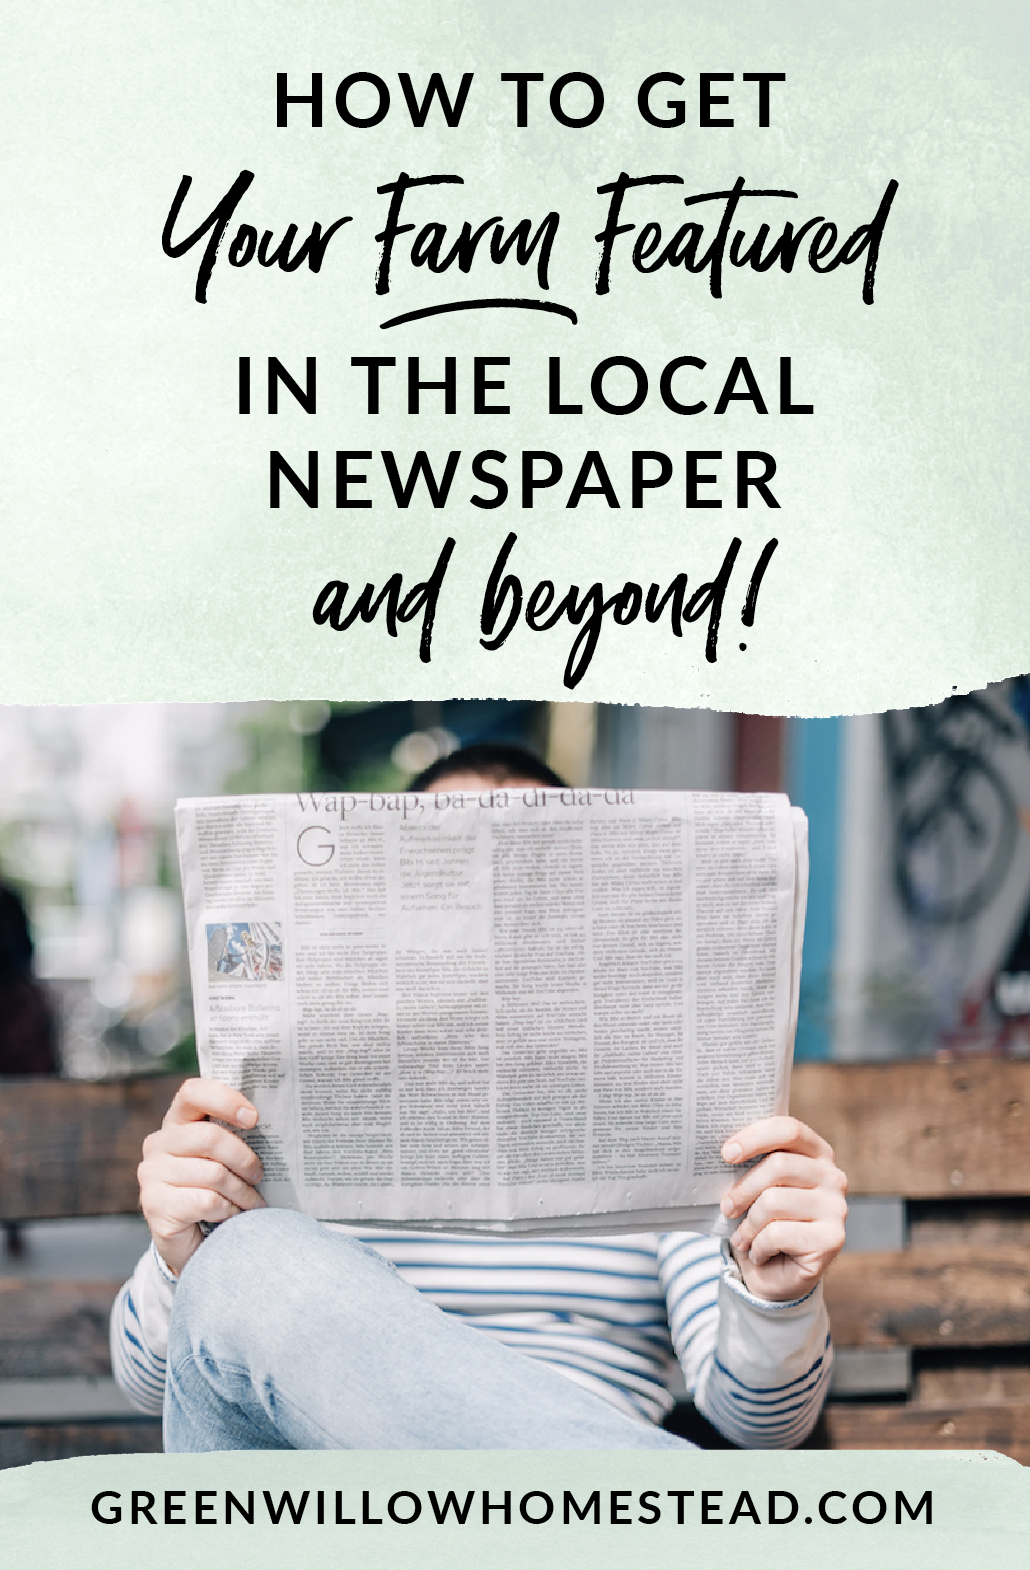 How to get your farm featured in the local newspaper and other press publications